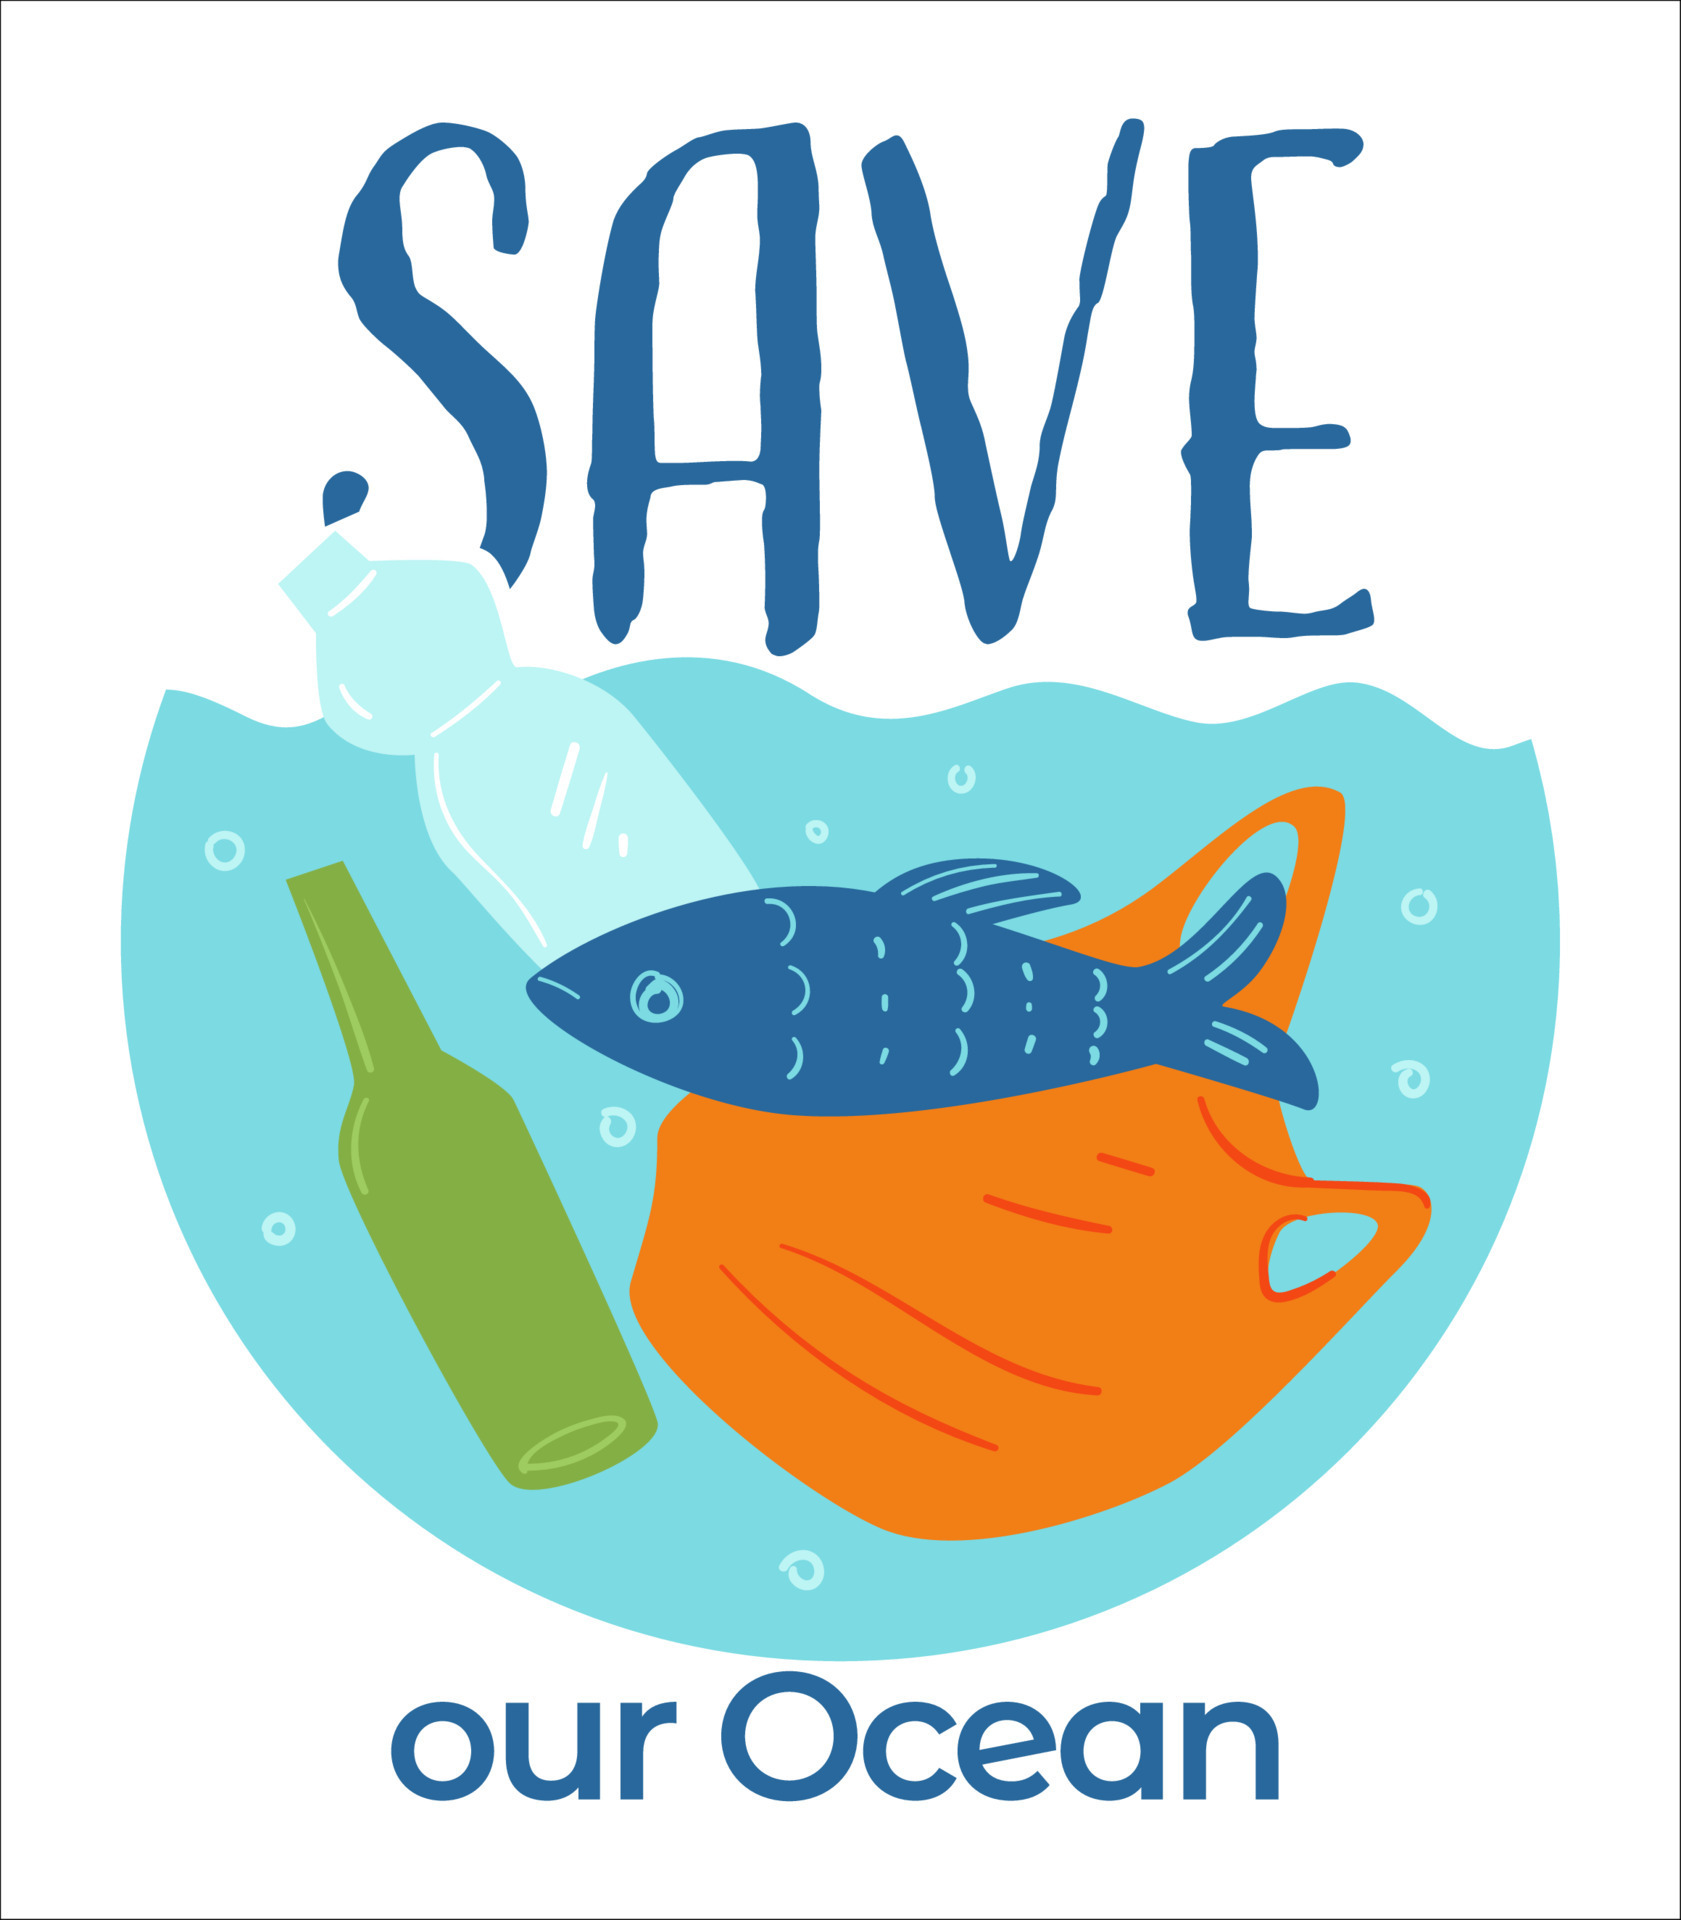 save our water poster